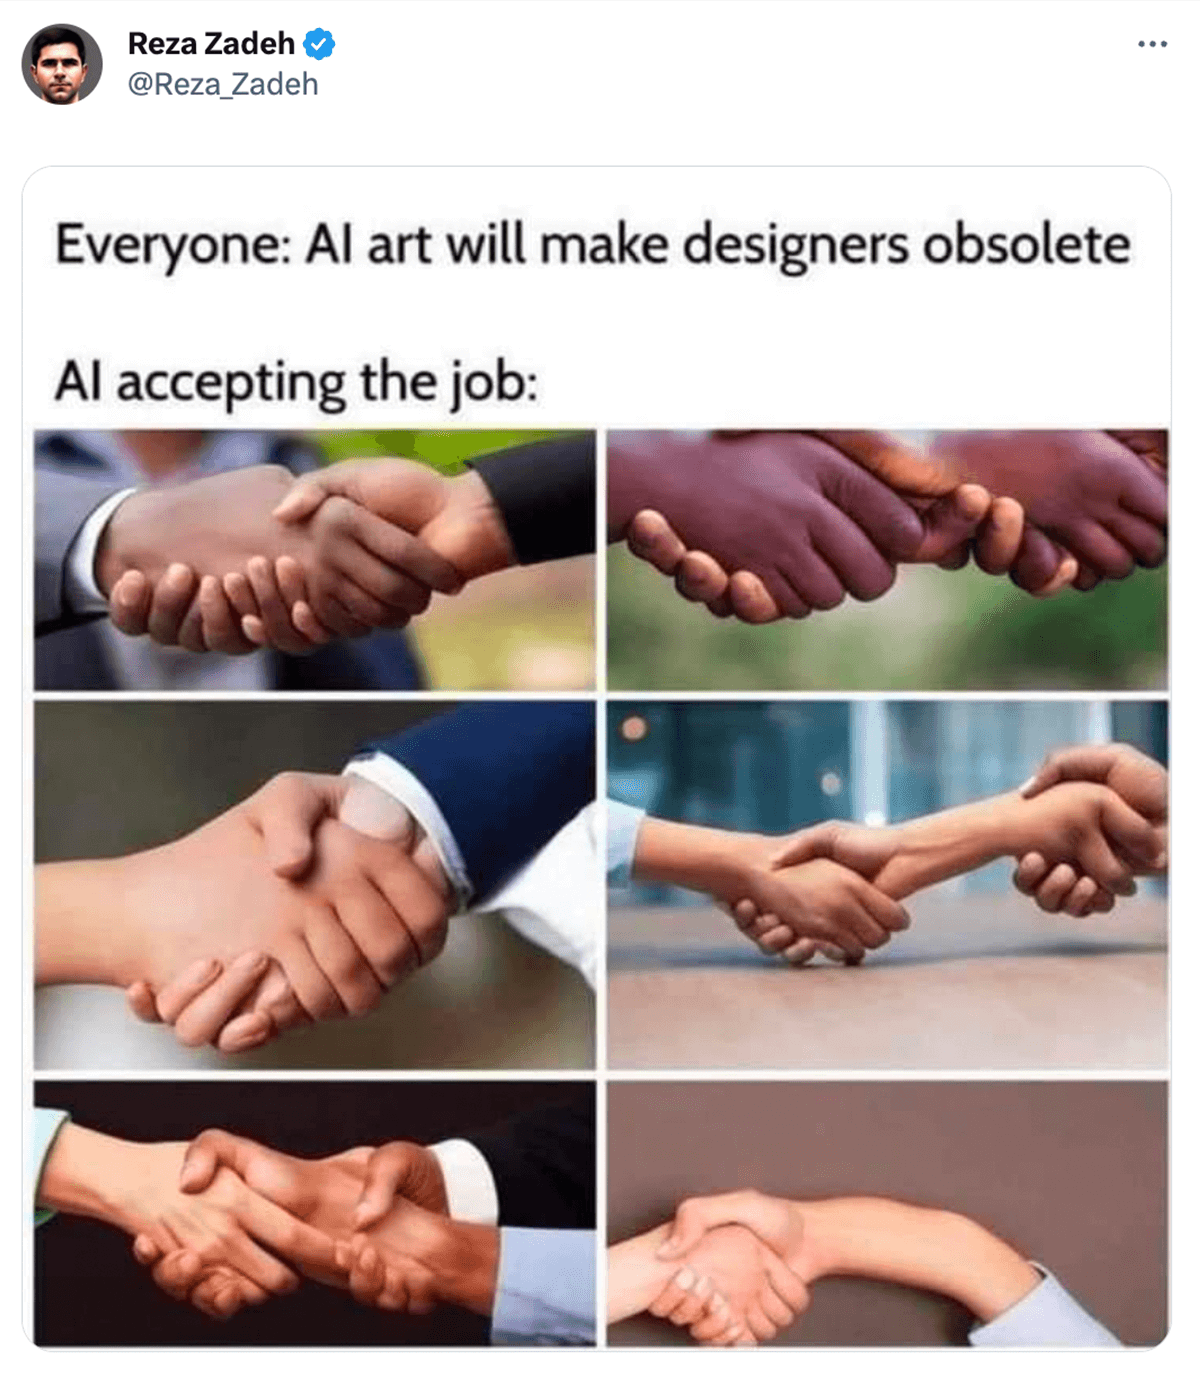 @Reza_Zadeh on twitter: Everyone: AI art will make designers obsolete. Al accepting the job: AI created images of handshakes. They are very bad.